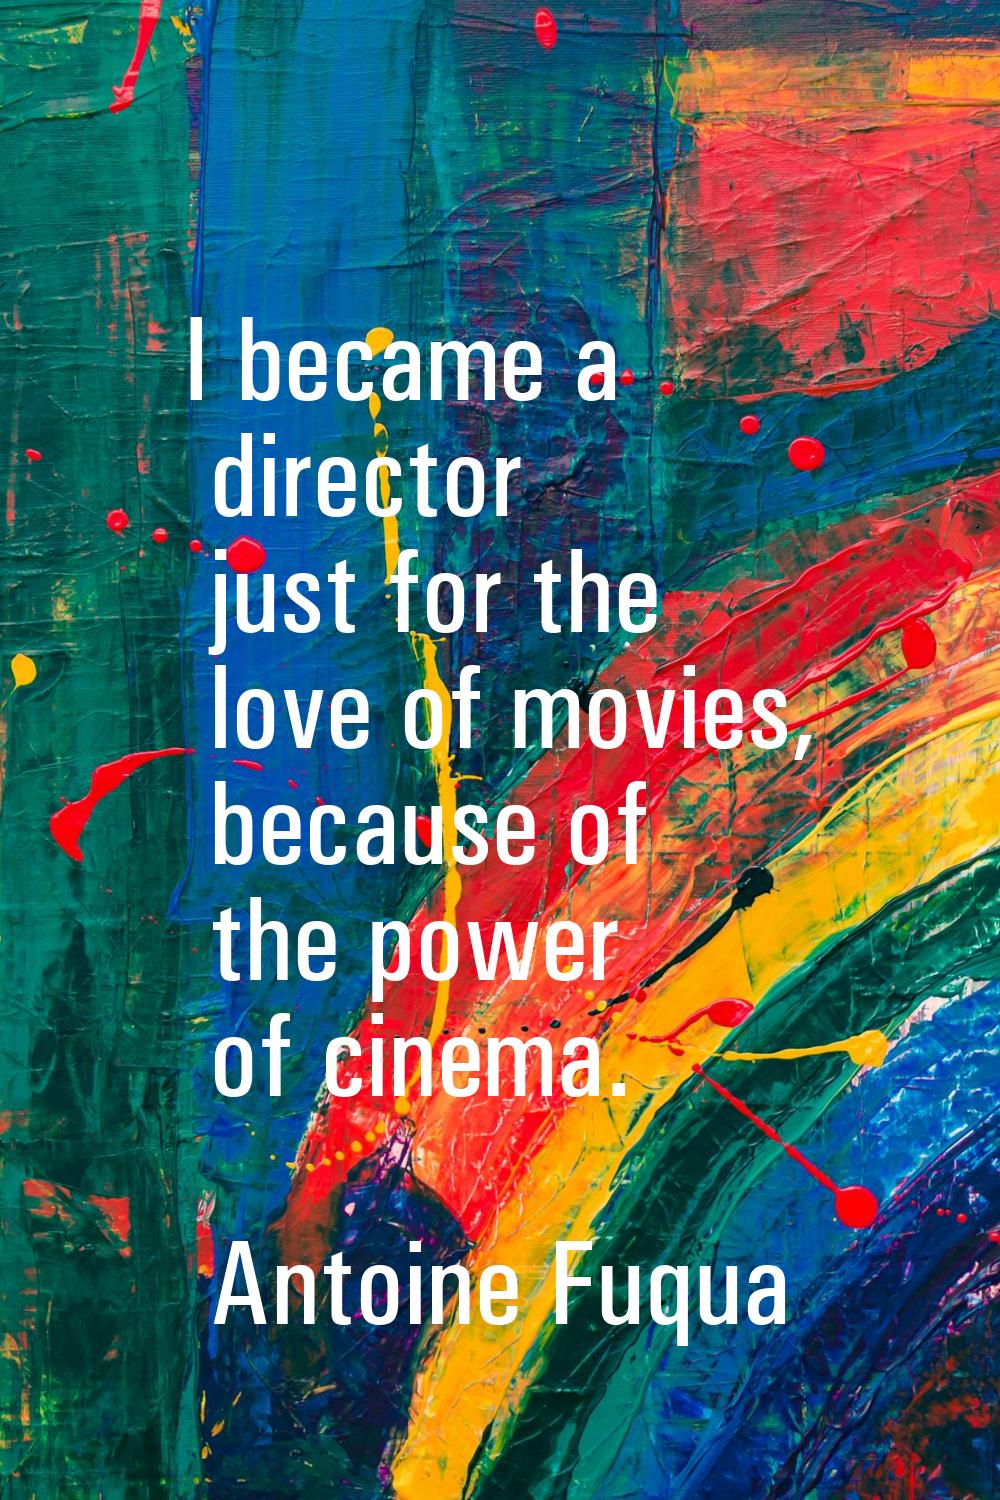 I became a director just for the love of movies, because of the power of cinema.